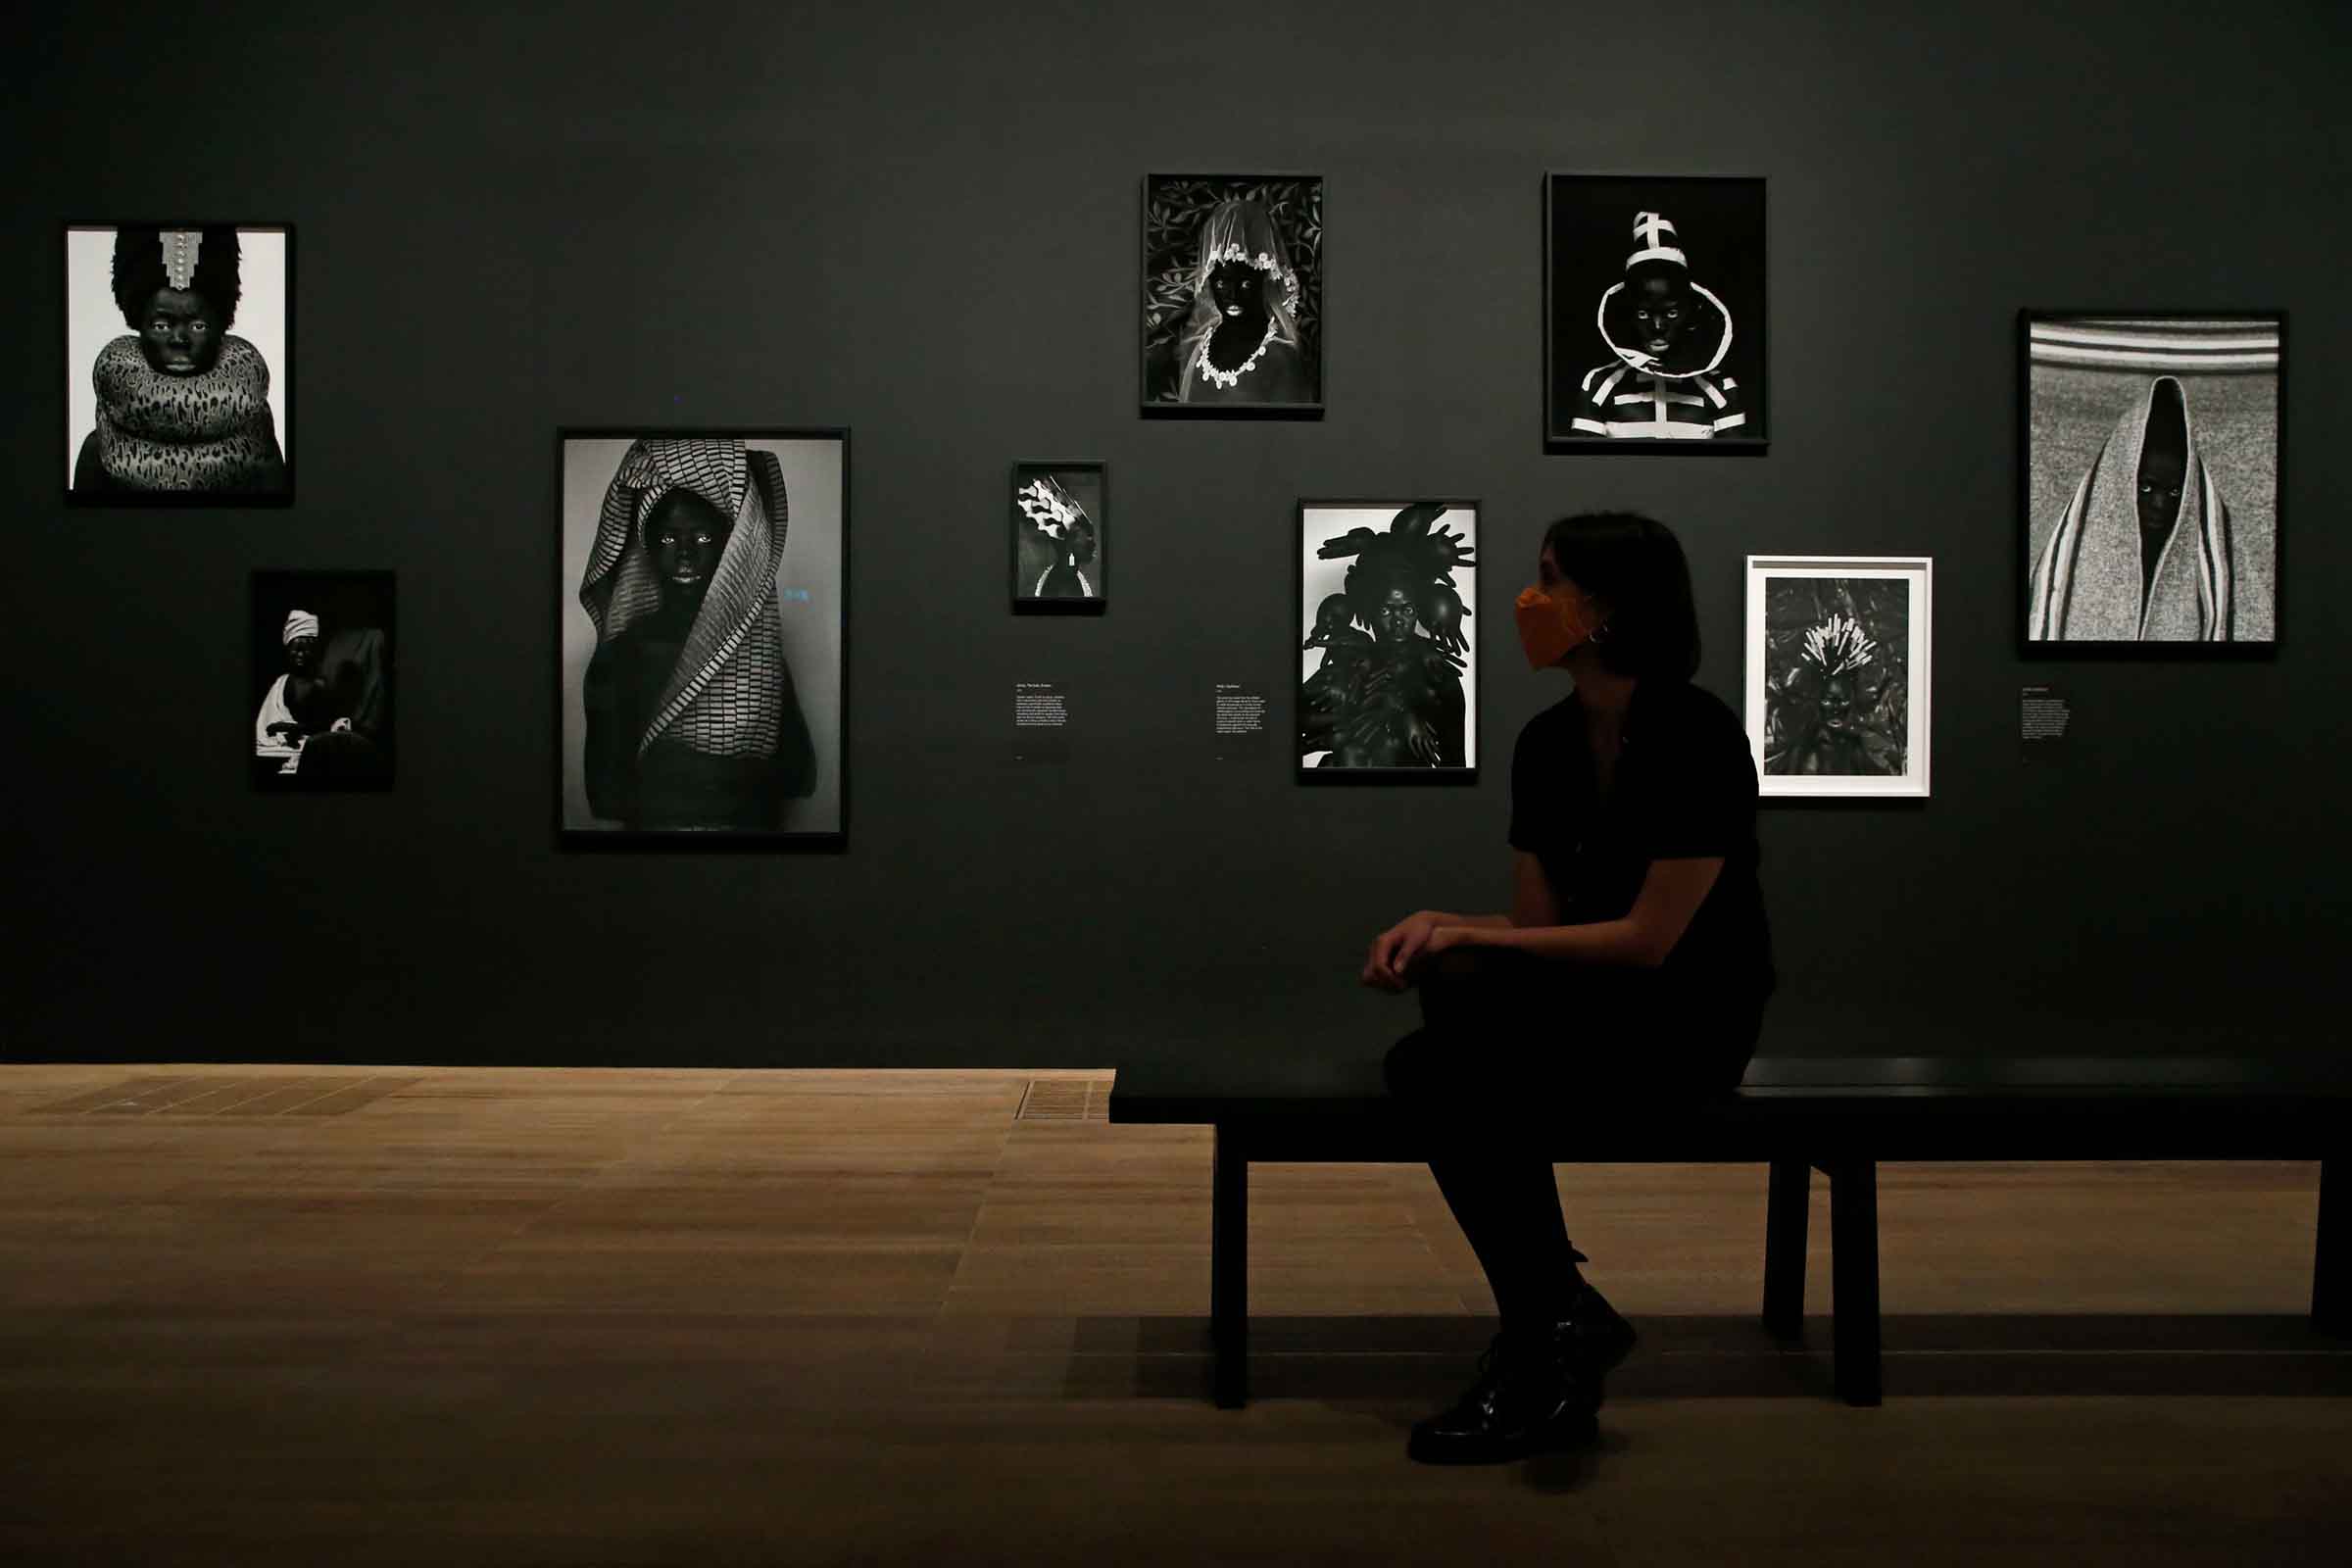 A Tate visitor poses in front of self portrait photographs from an on-going series entitled 'Somnyama Ngonyama' by South African visual activist Zanele Muholi in London on Nov. 3, 2020. (Holle Adams—AFP/Getty Images)